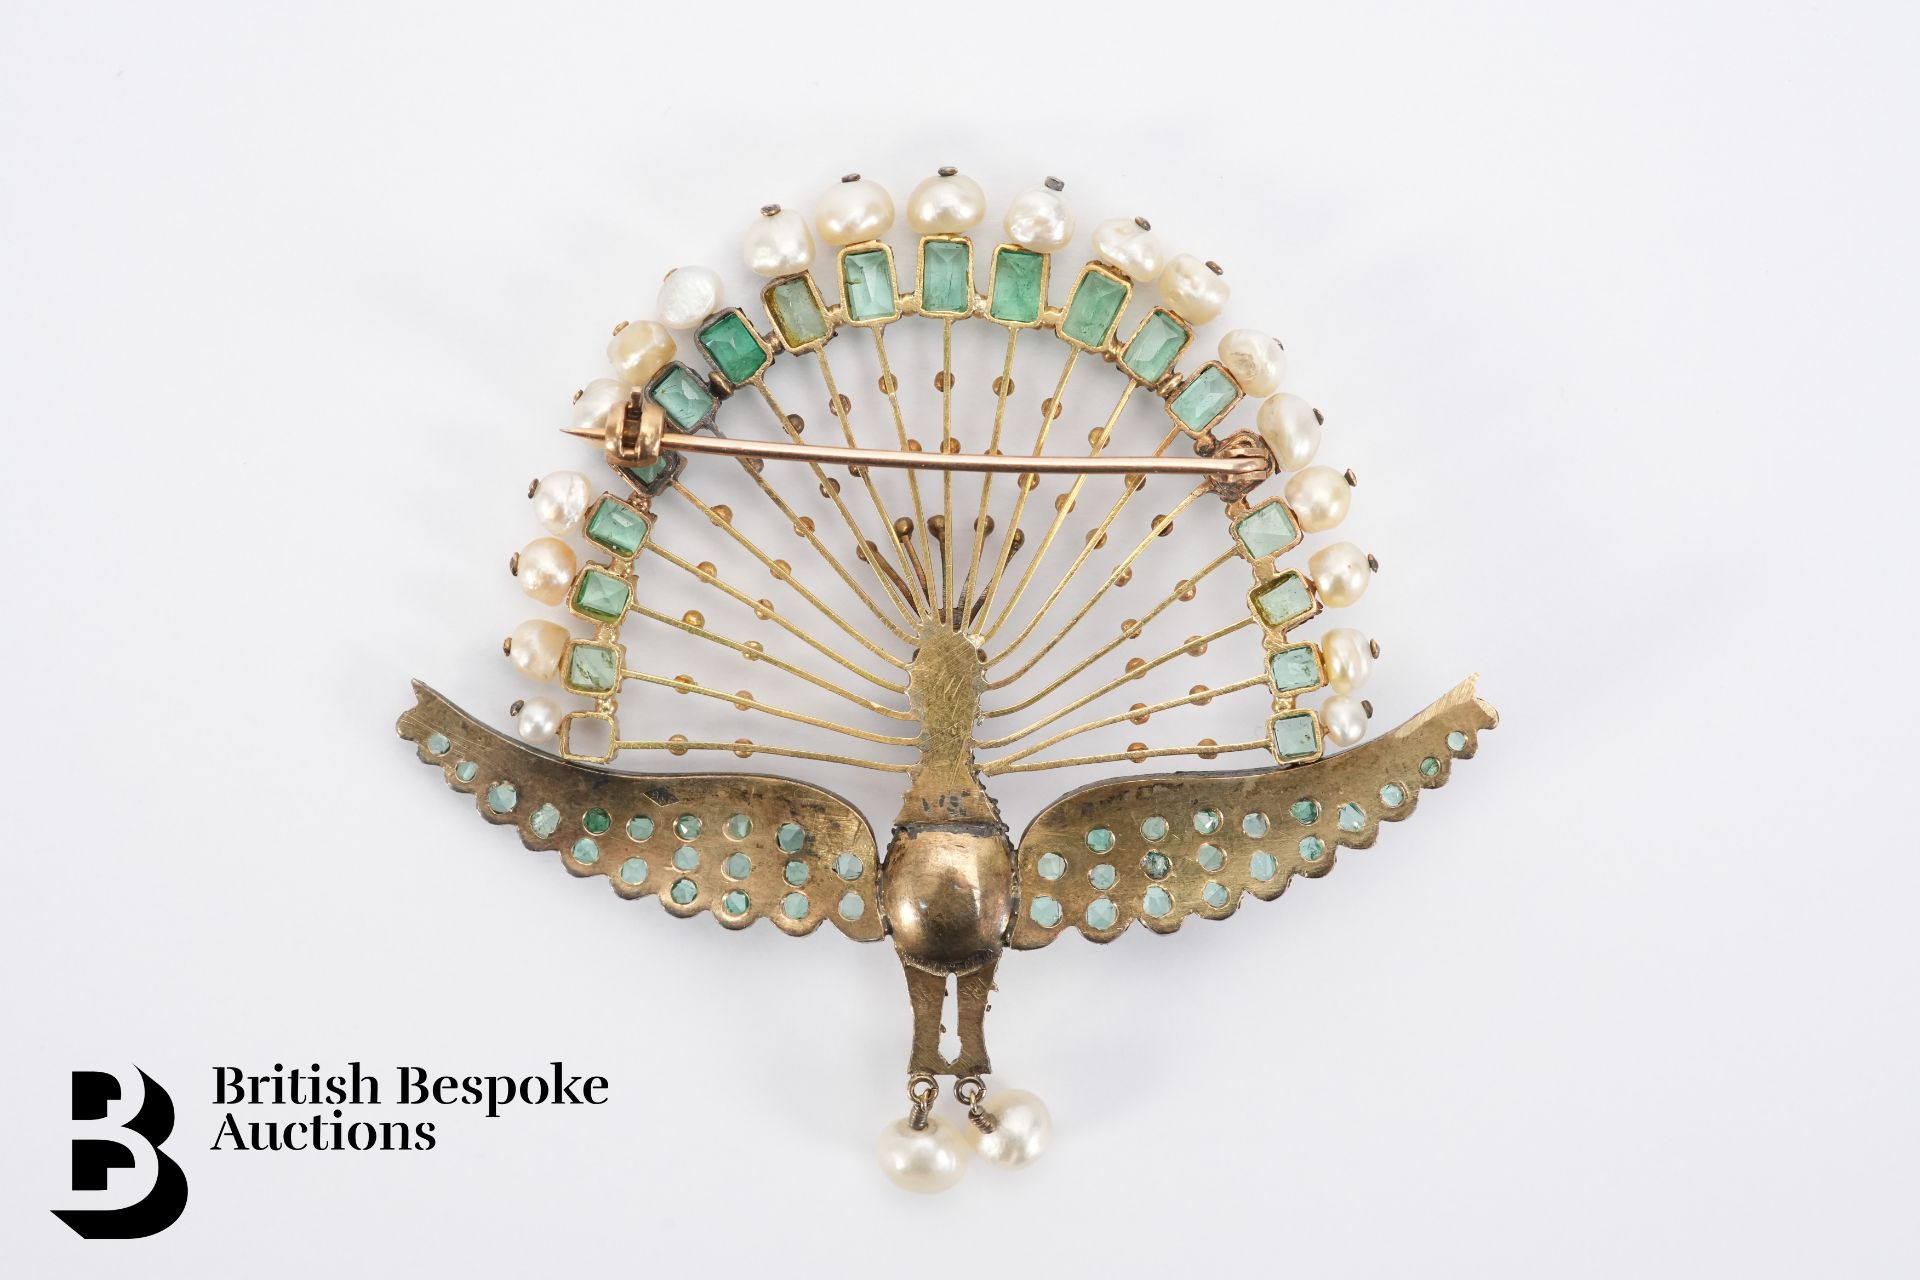 Victorian 18ct Gold Egyptian Revival Emerald, Diamond and Pearl Peacock Brooch - Image 5 of 7